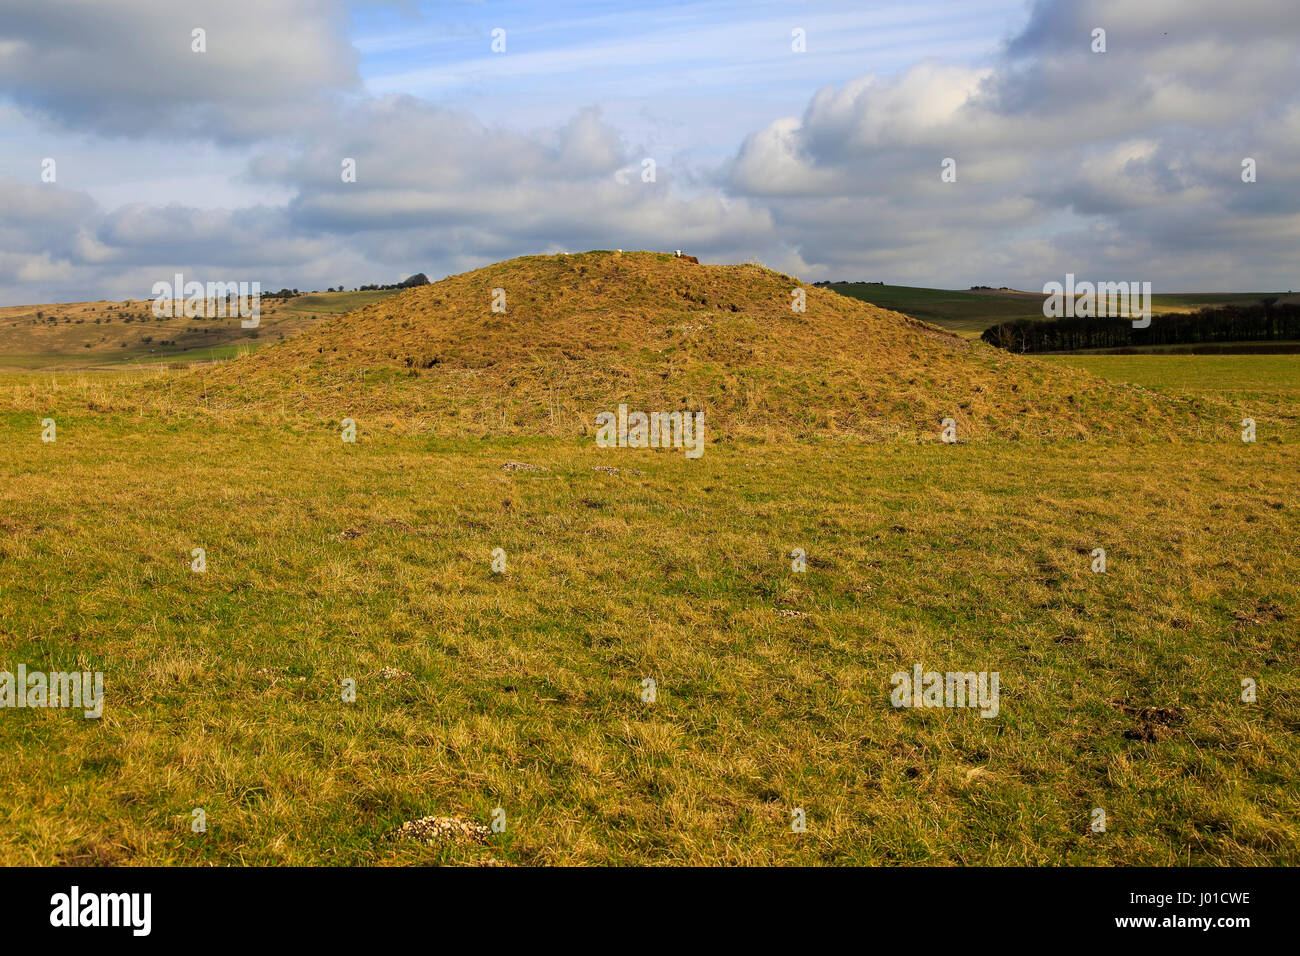 Round barrow ancient monument burial chamber, Baltic Farm, Bishops Cannings, Wiltshire, England, UK Stock Photo